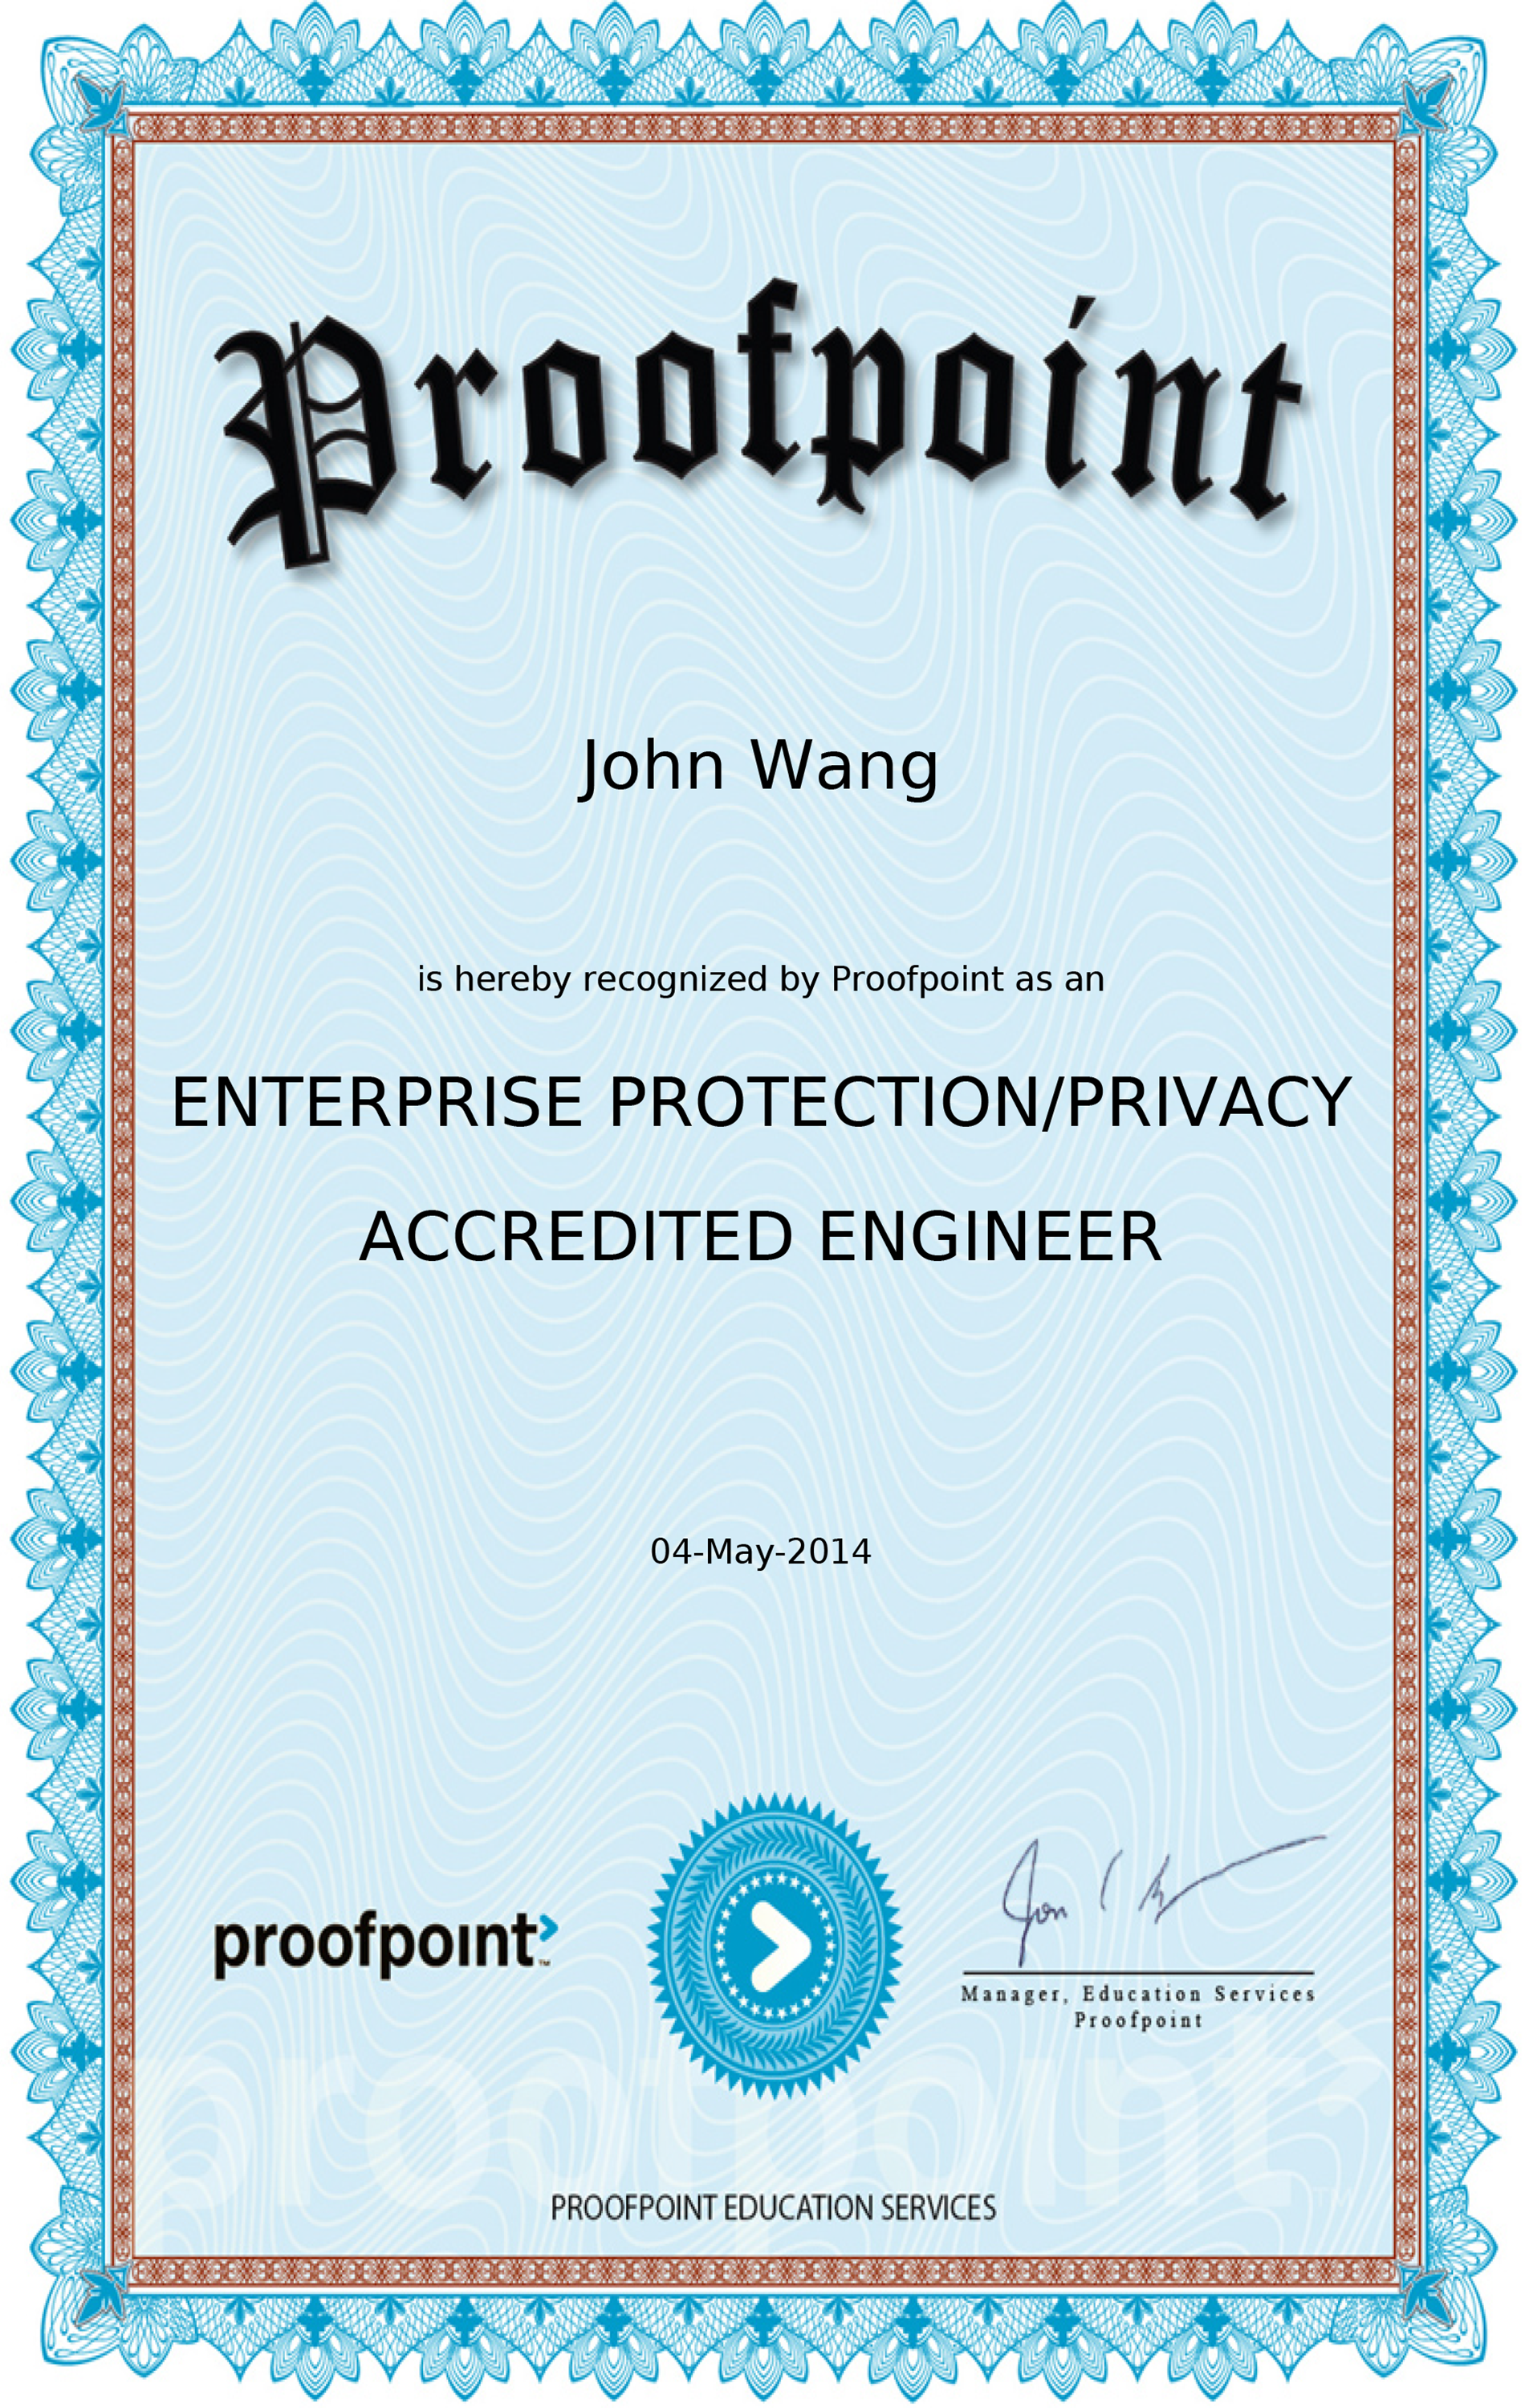 John's Enterprise Protection/Privacy Accredited Engineer from Proofpoint